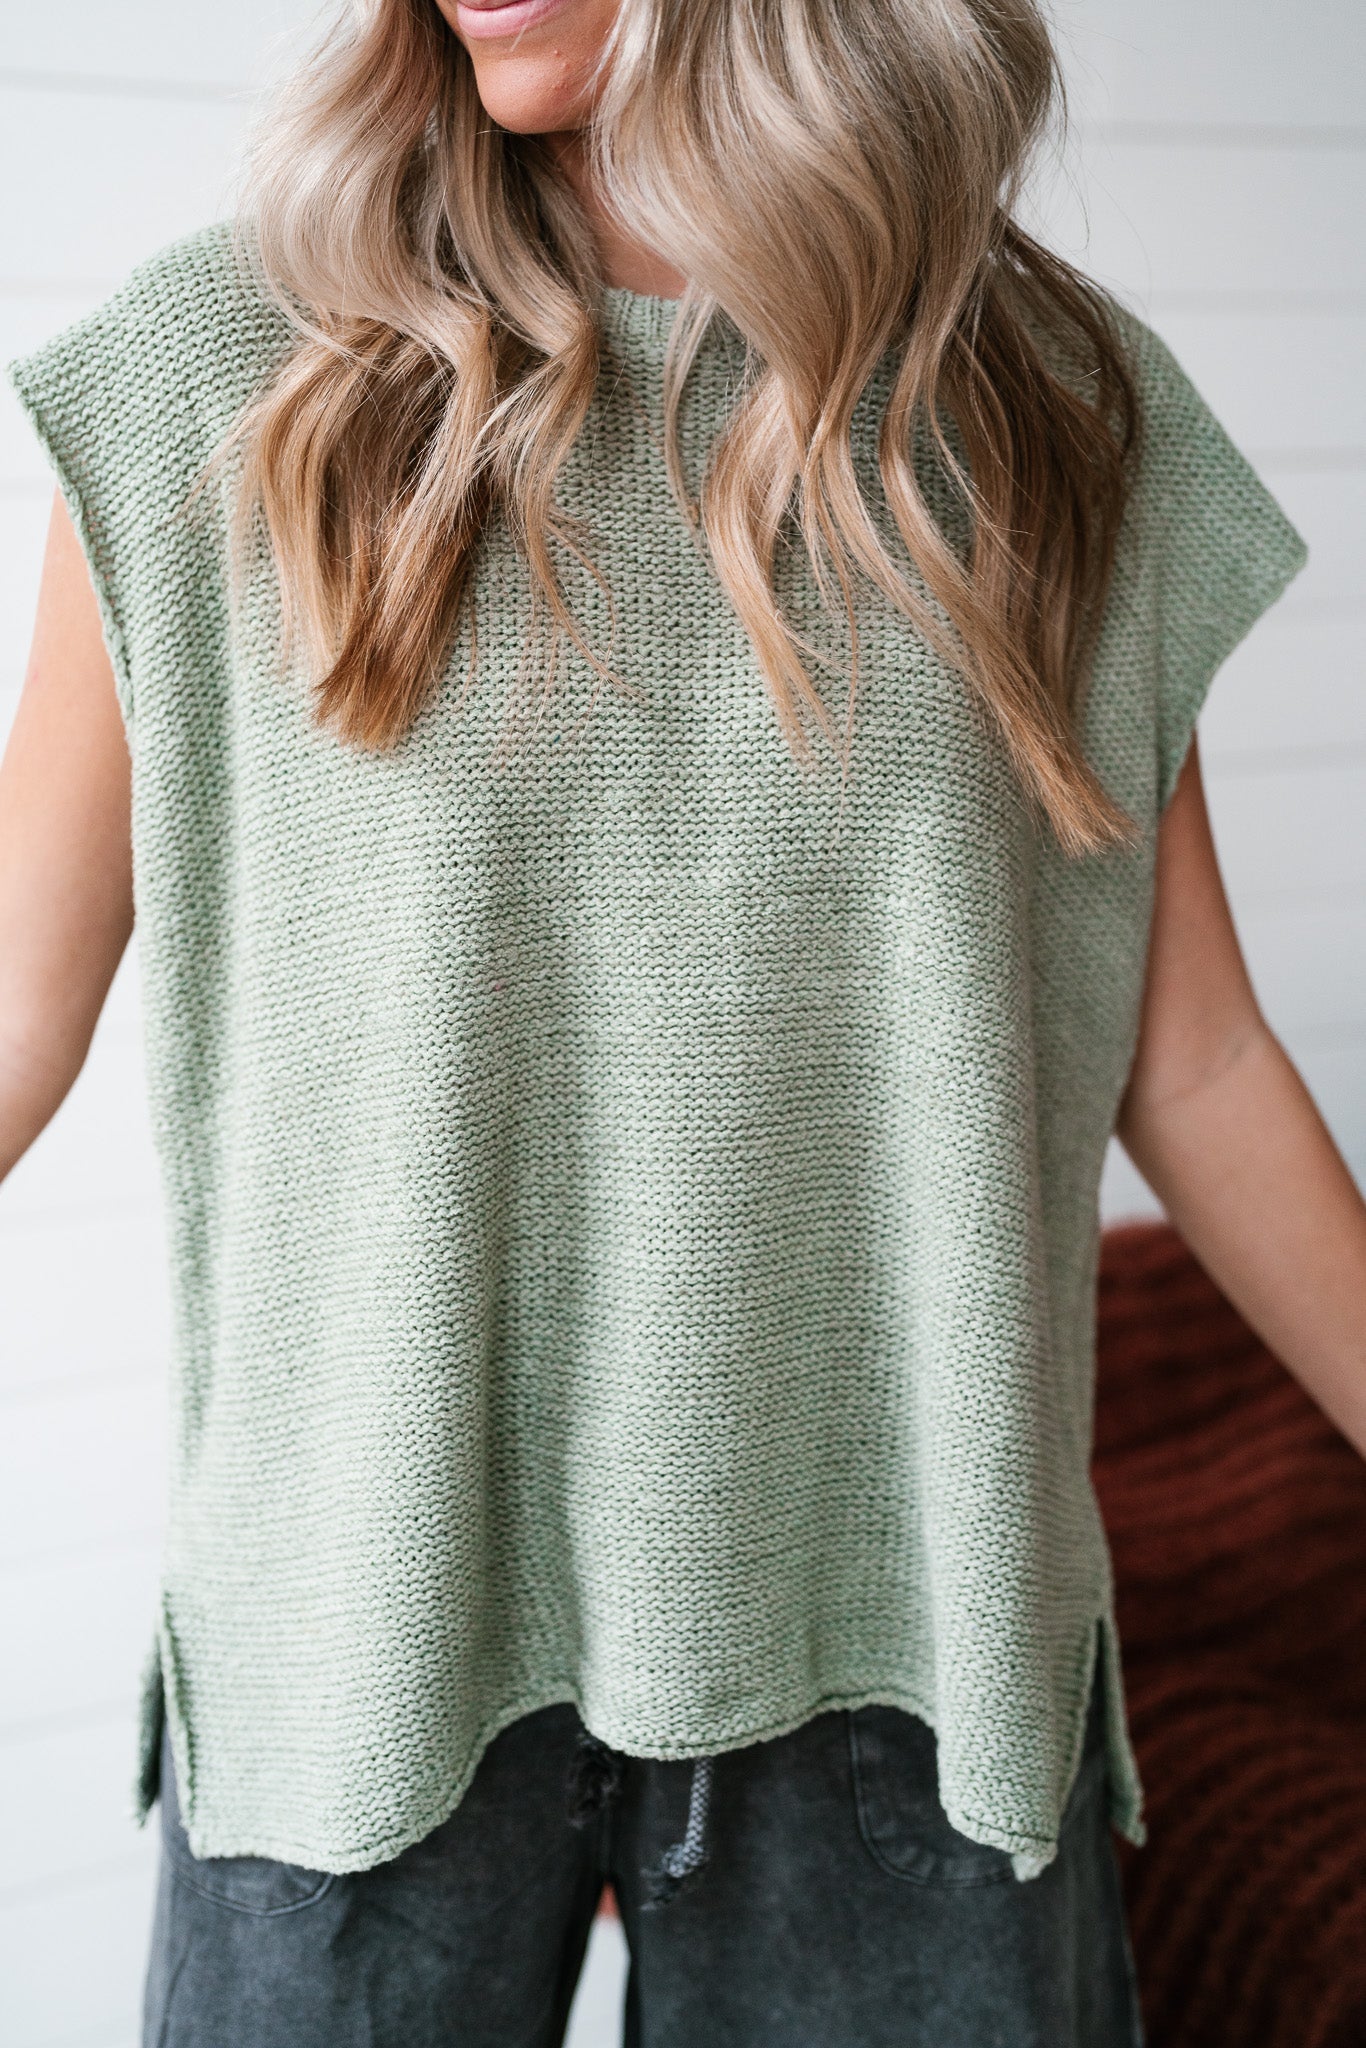 She's A Staple Sweater - Sage